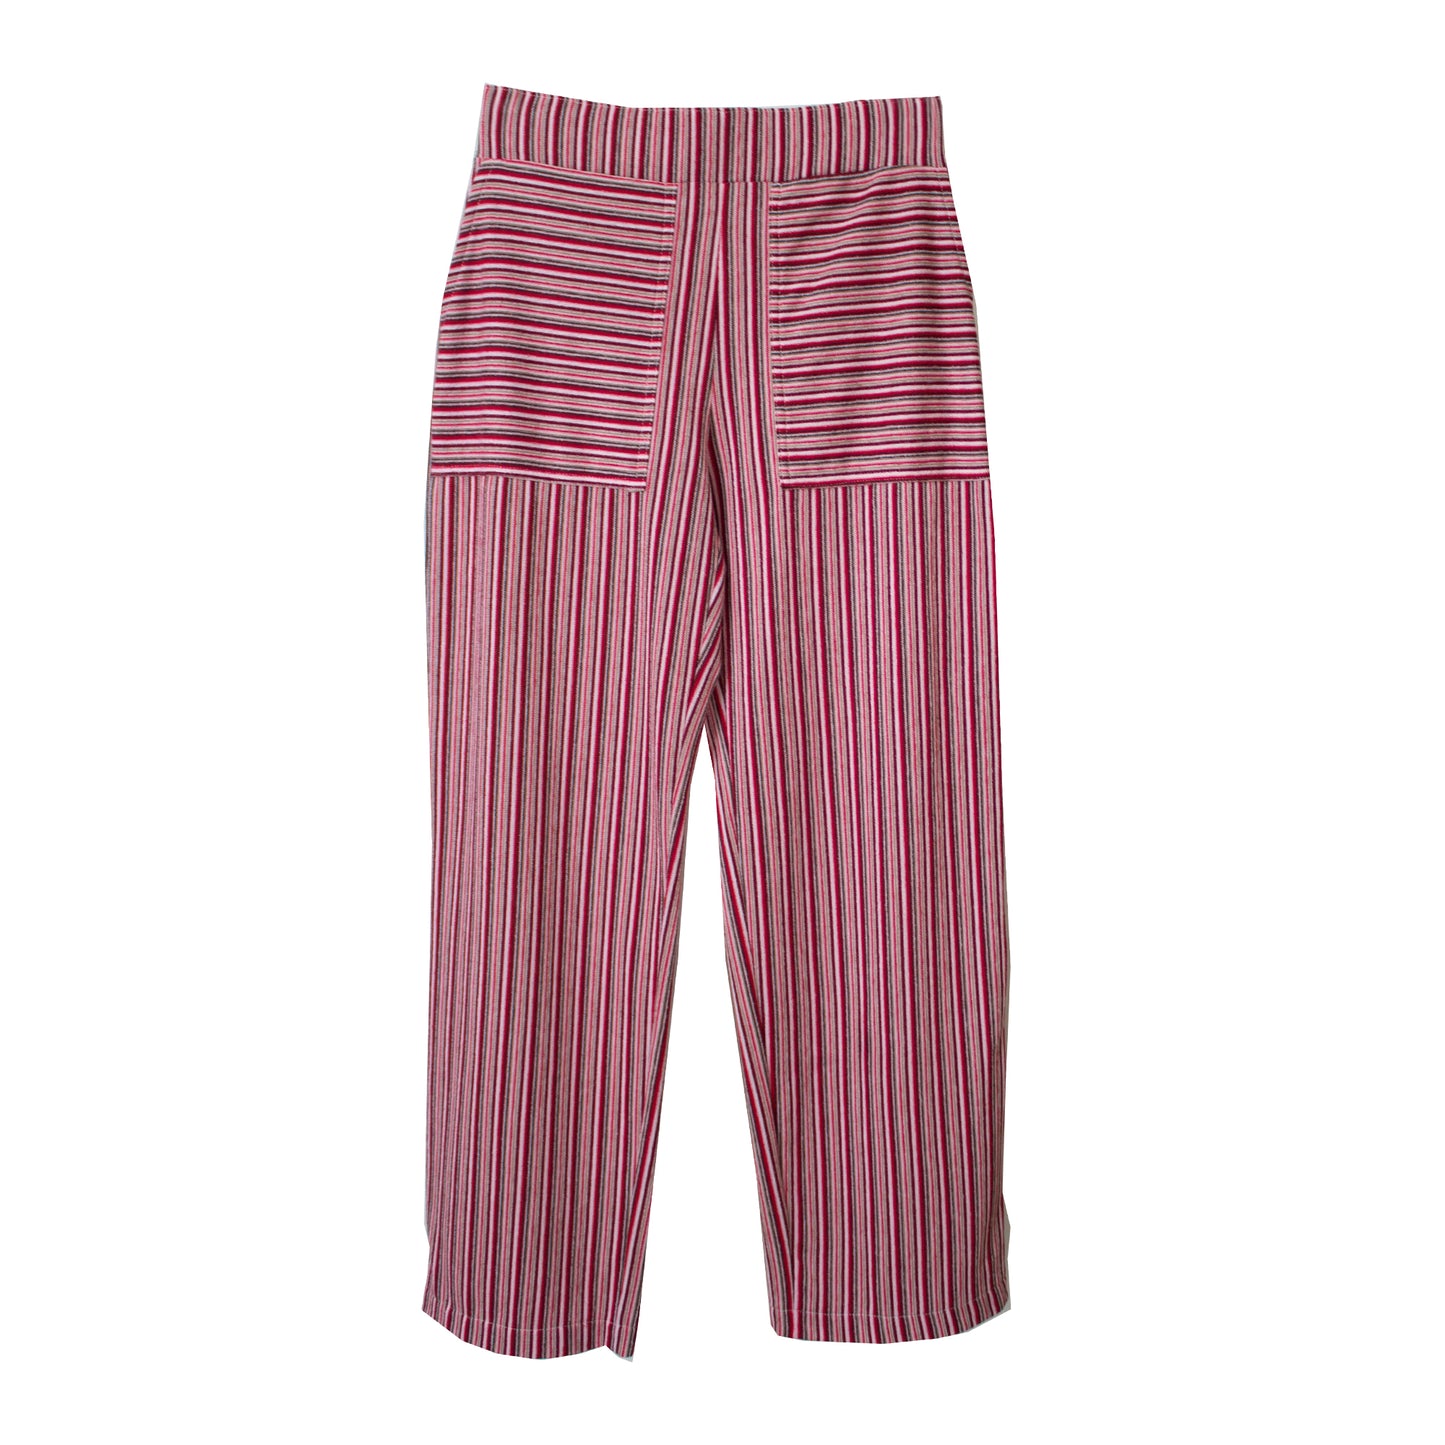 Tracey Clave Pant - Stripe